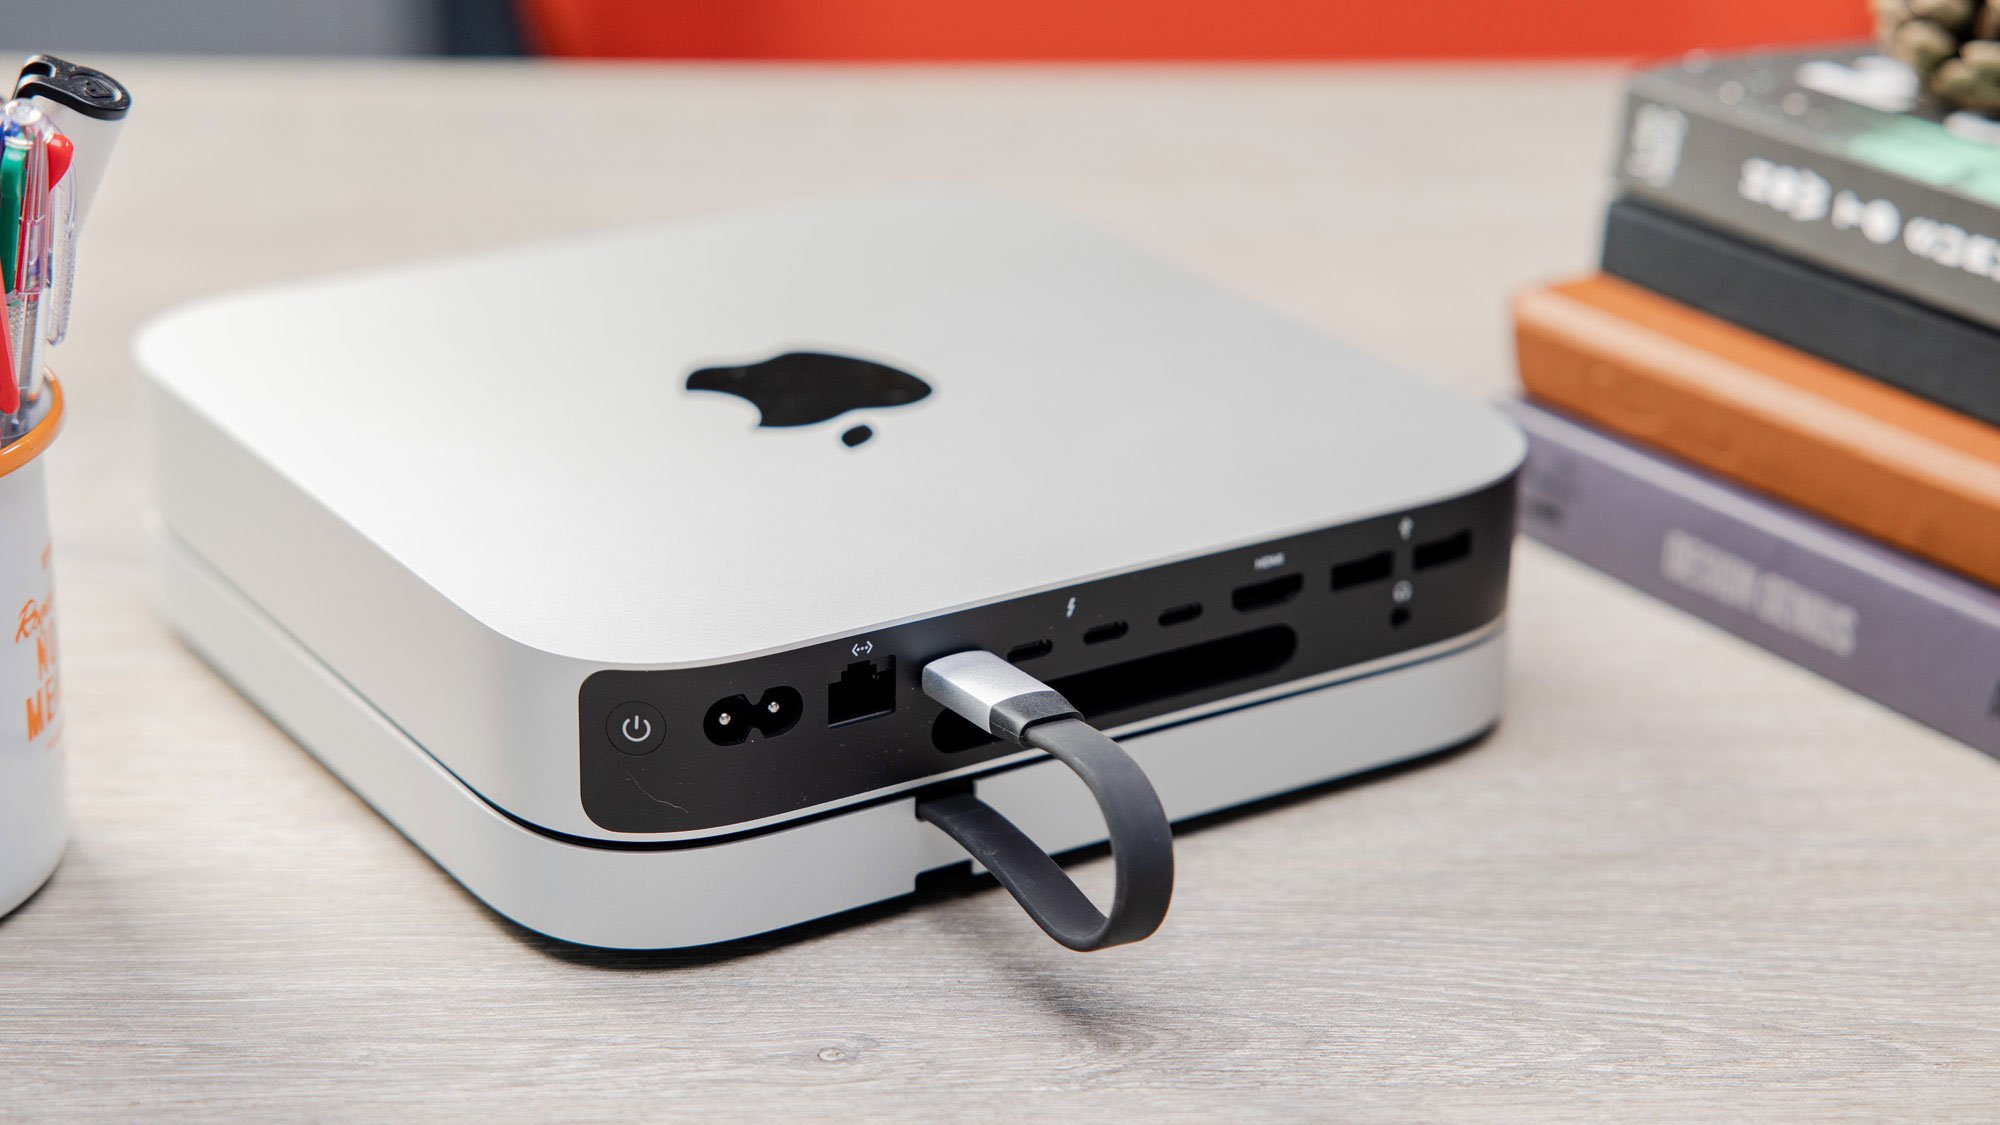 Satechi Stand & Hub with NVMe SSD review: Fixing the Mac mini’s shortcomings